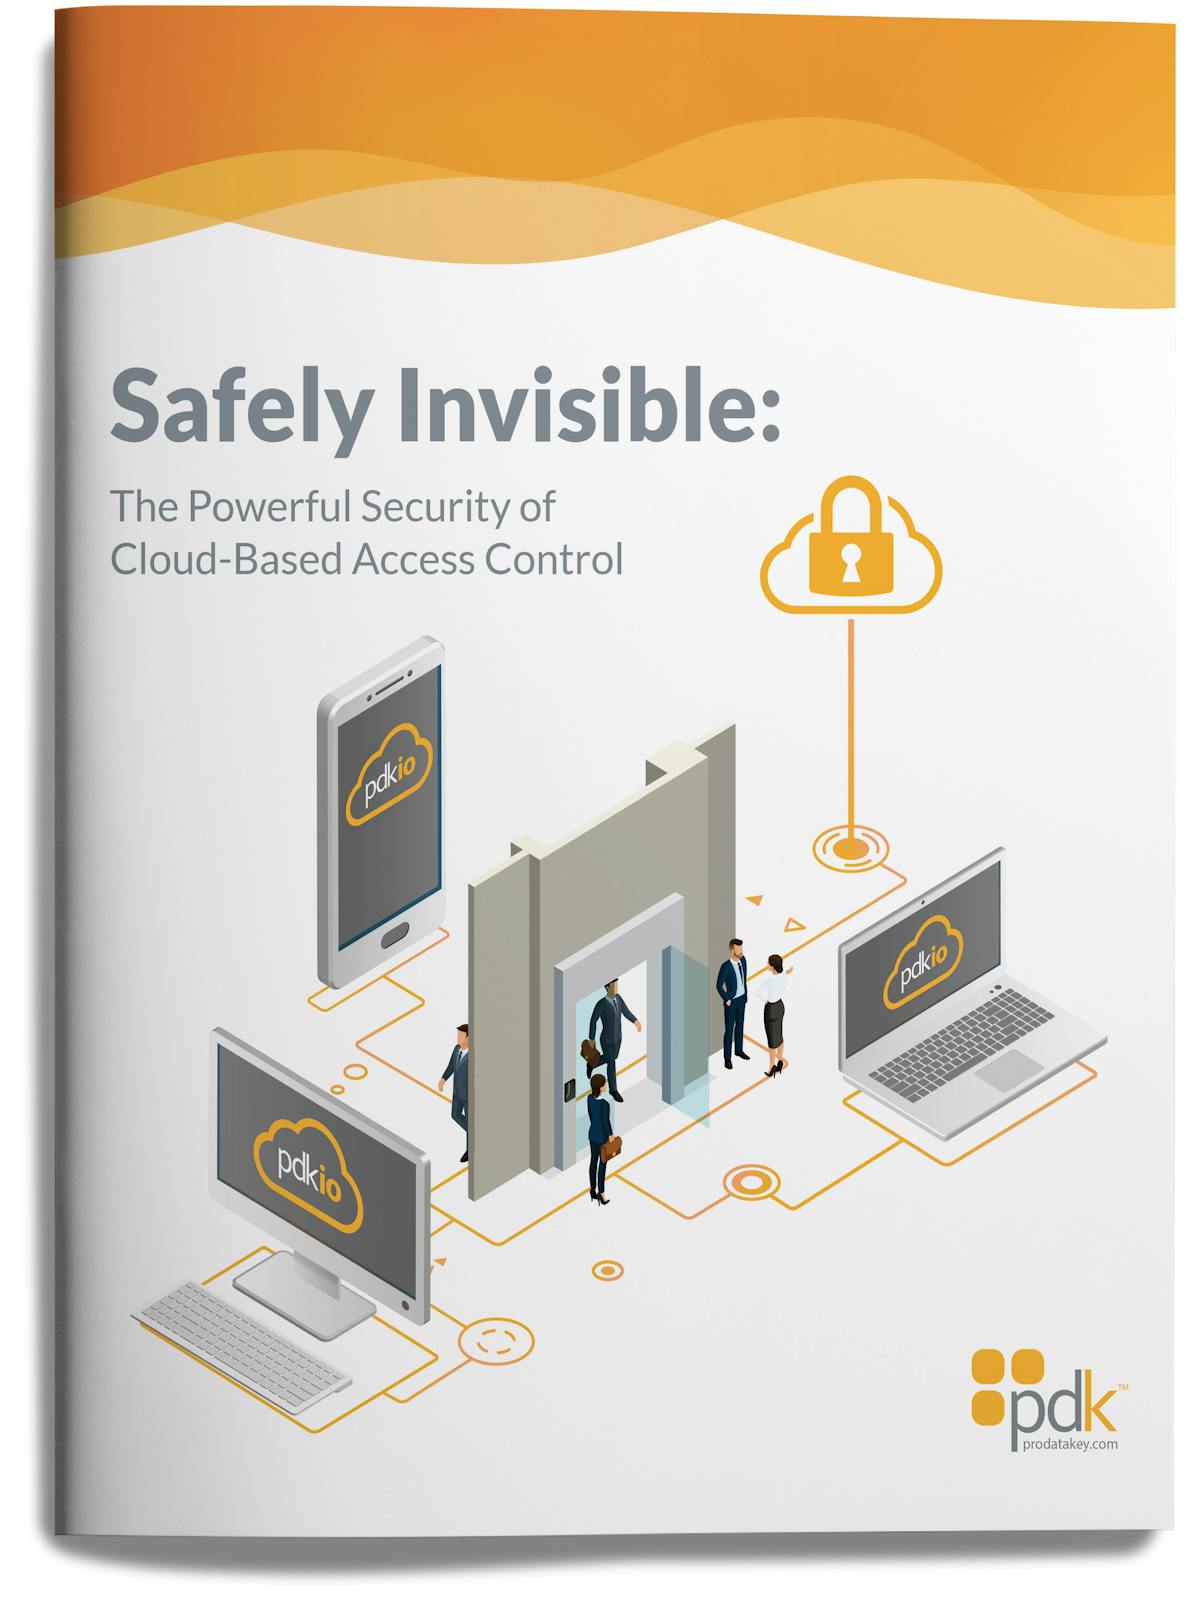 ProdataKey (PDK), an innovator of cloud-based networked and wireless access control products and services, has released a whitepaper addressing the cybersecurity benefits of cloud-based access control solutions.